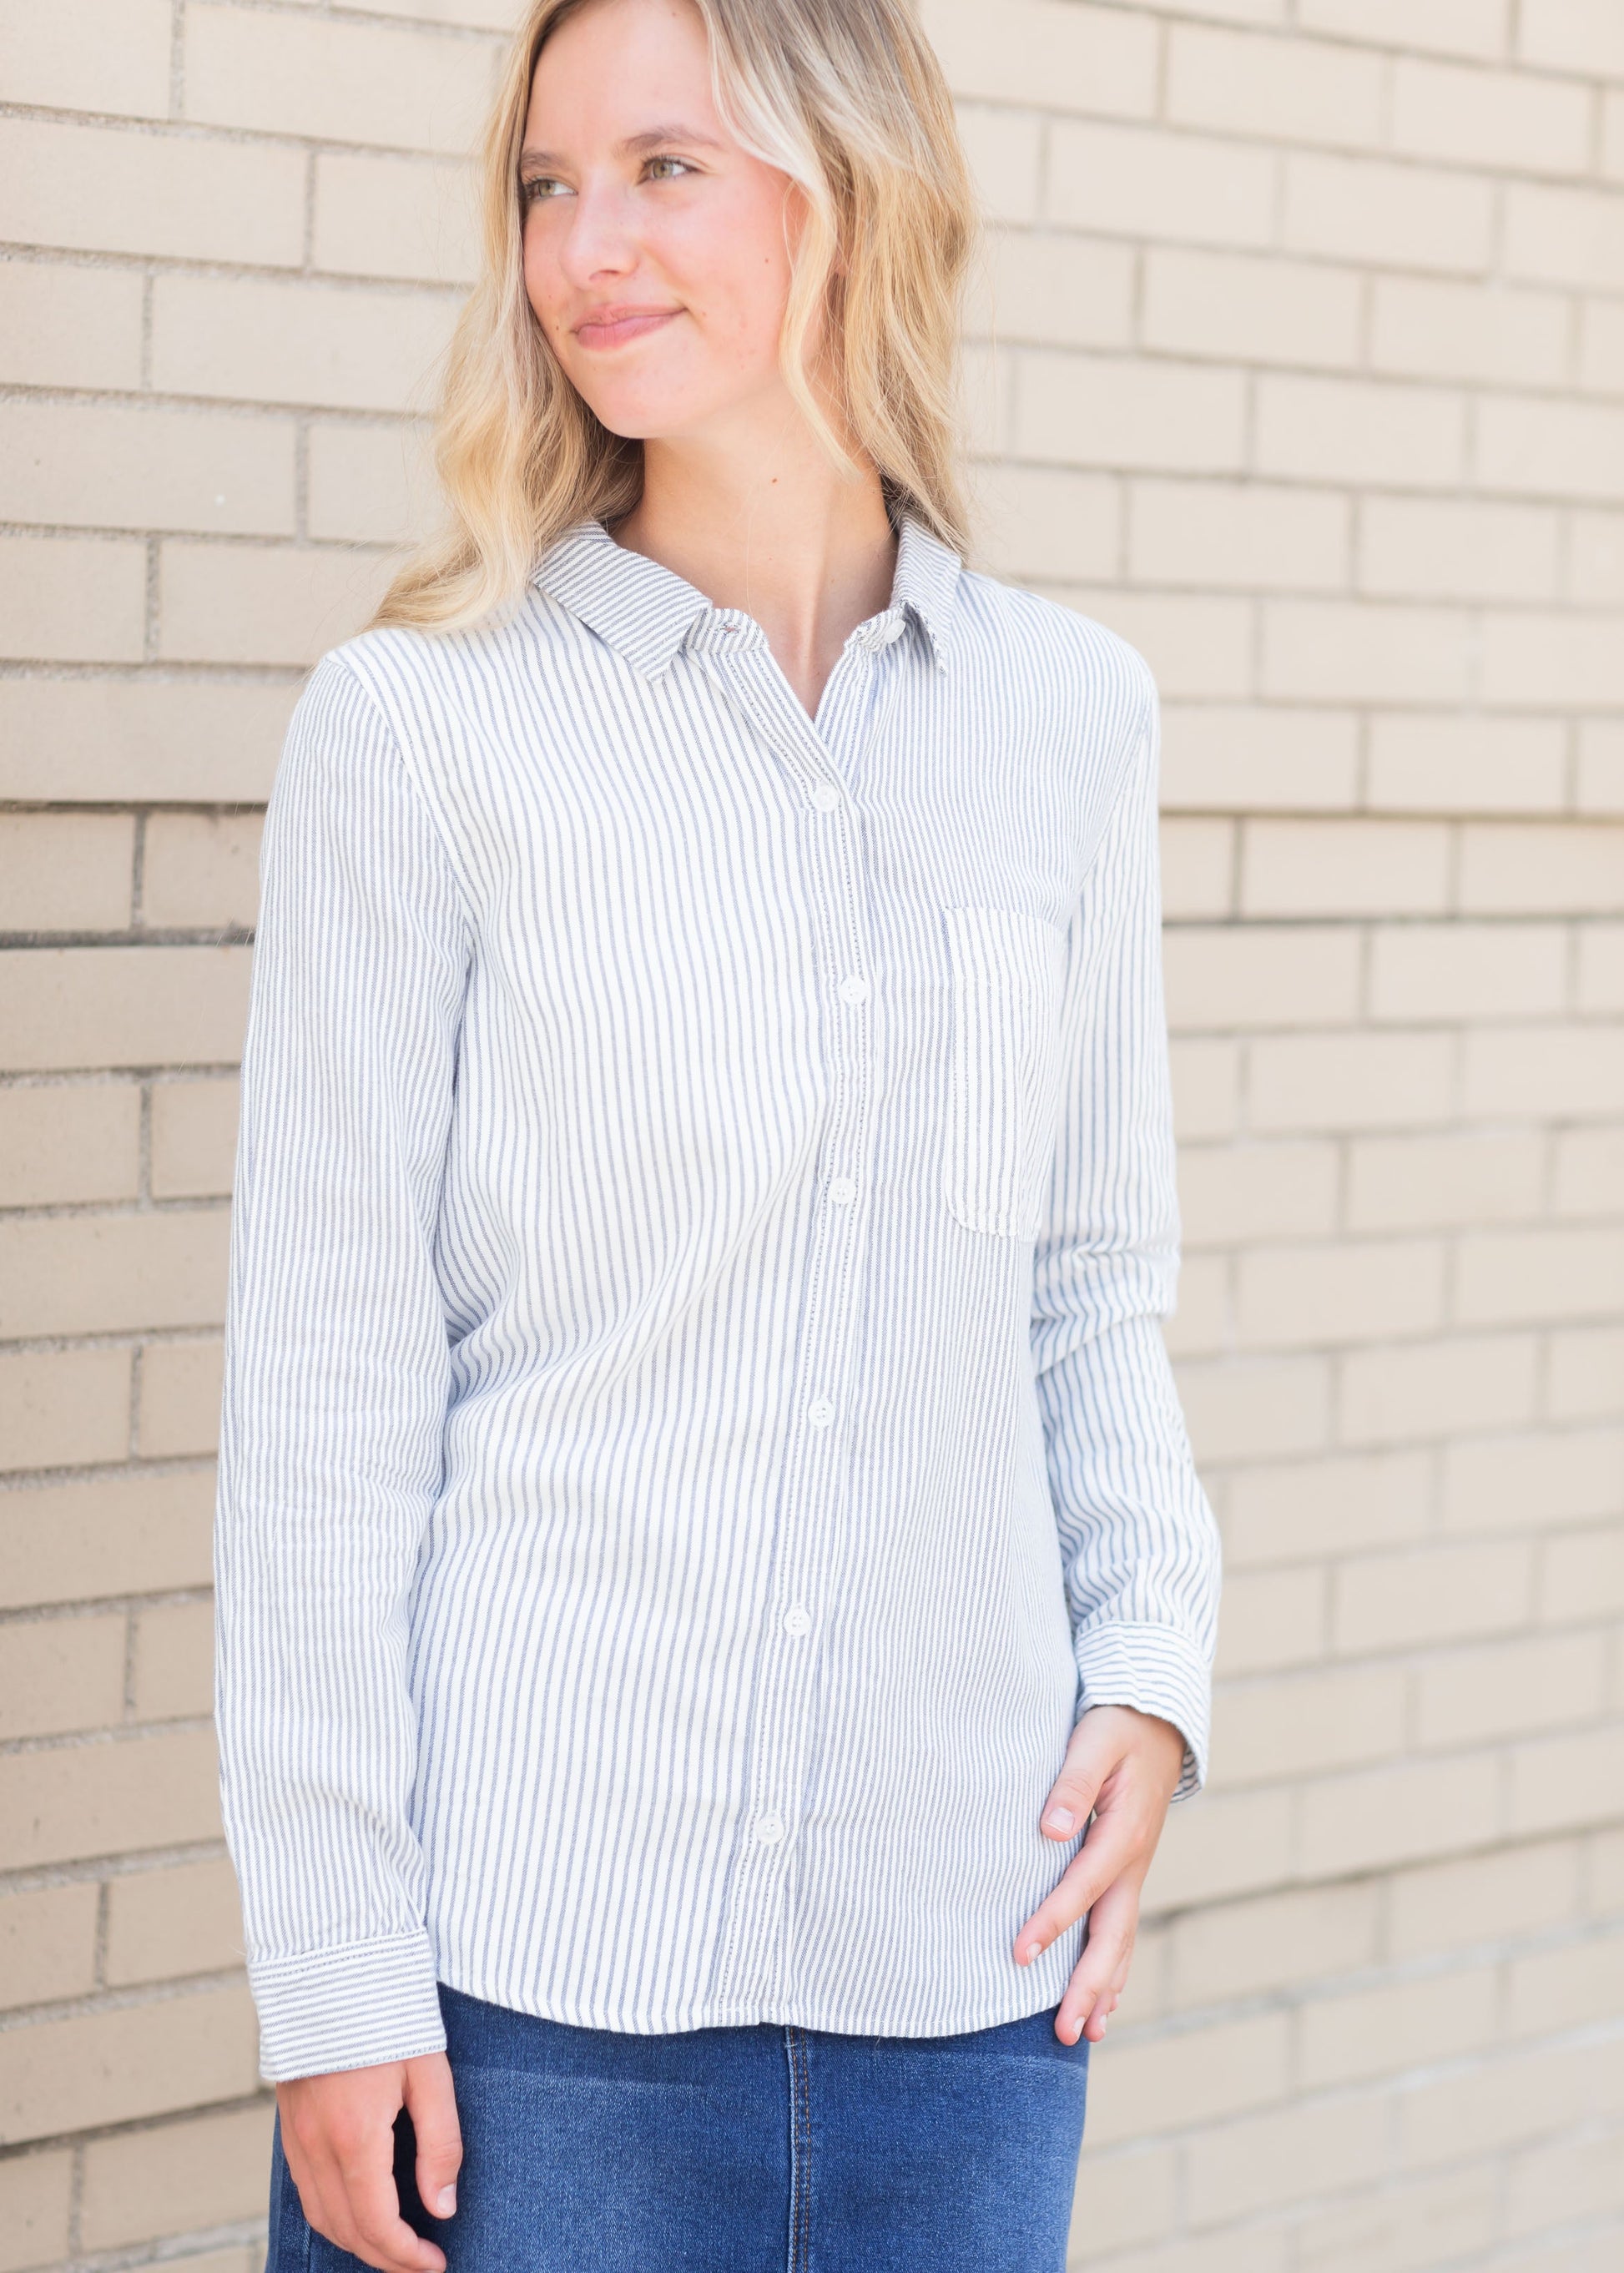 Blue + White Striped Long Sleeve Top Tops